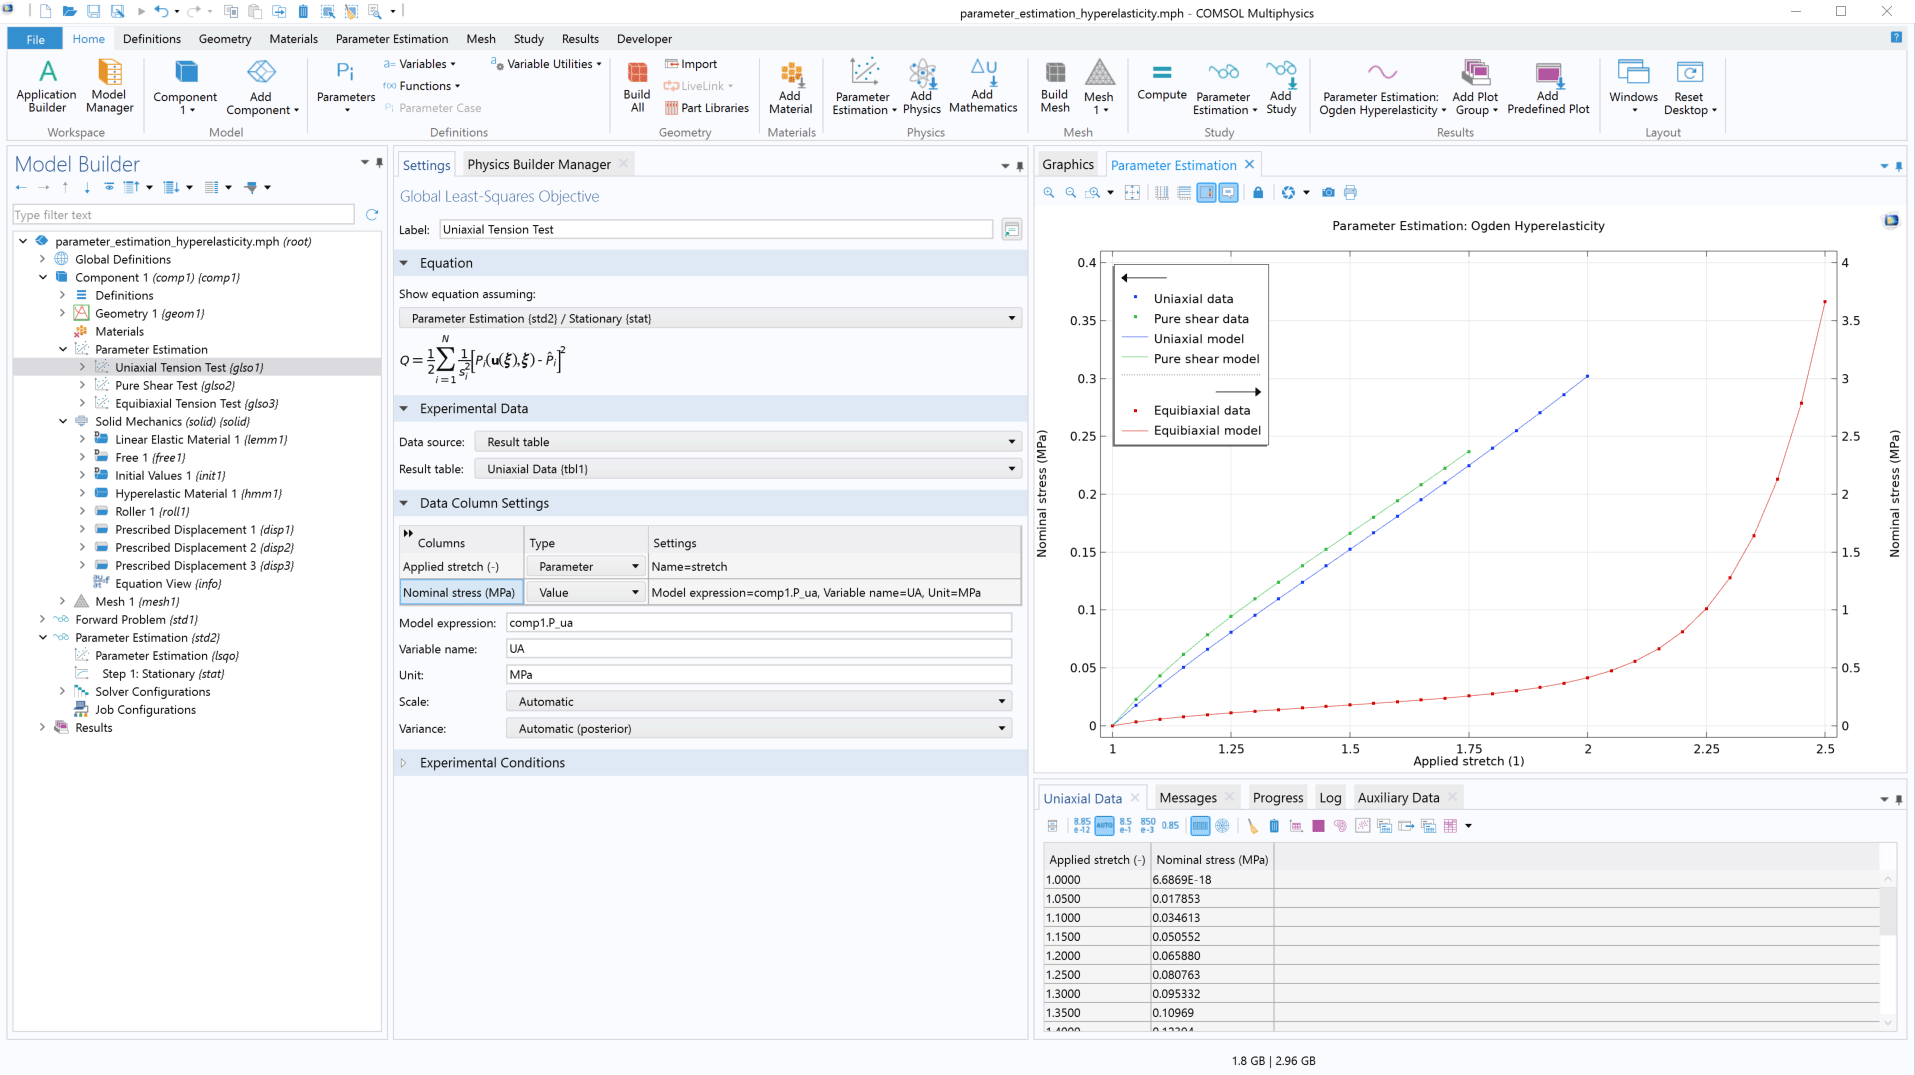 The COMSOL Multiphysics UI showing the Model Builder with a Global Least-Squares Objective node highlighted, the corresponding Settings window, and a 1D plot in the Graphics window.